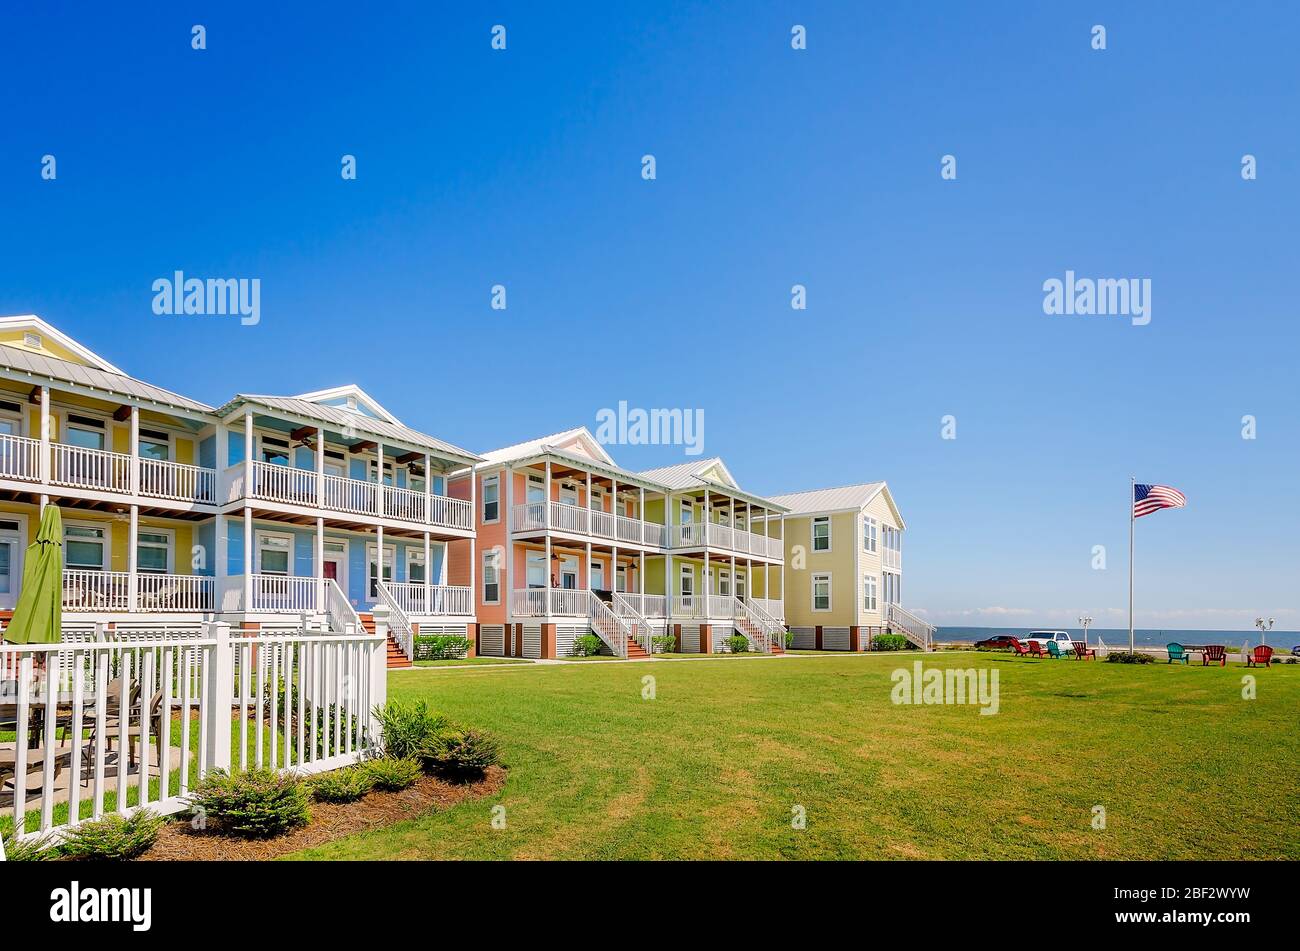 East Beach Condos are pictured, Aug. 28, 2015, in Pass Christian, Mississippi. The Key West-inspired condominiums are located on Beach Boulevard. Stock Photo